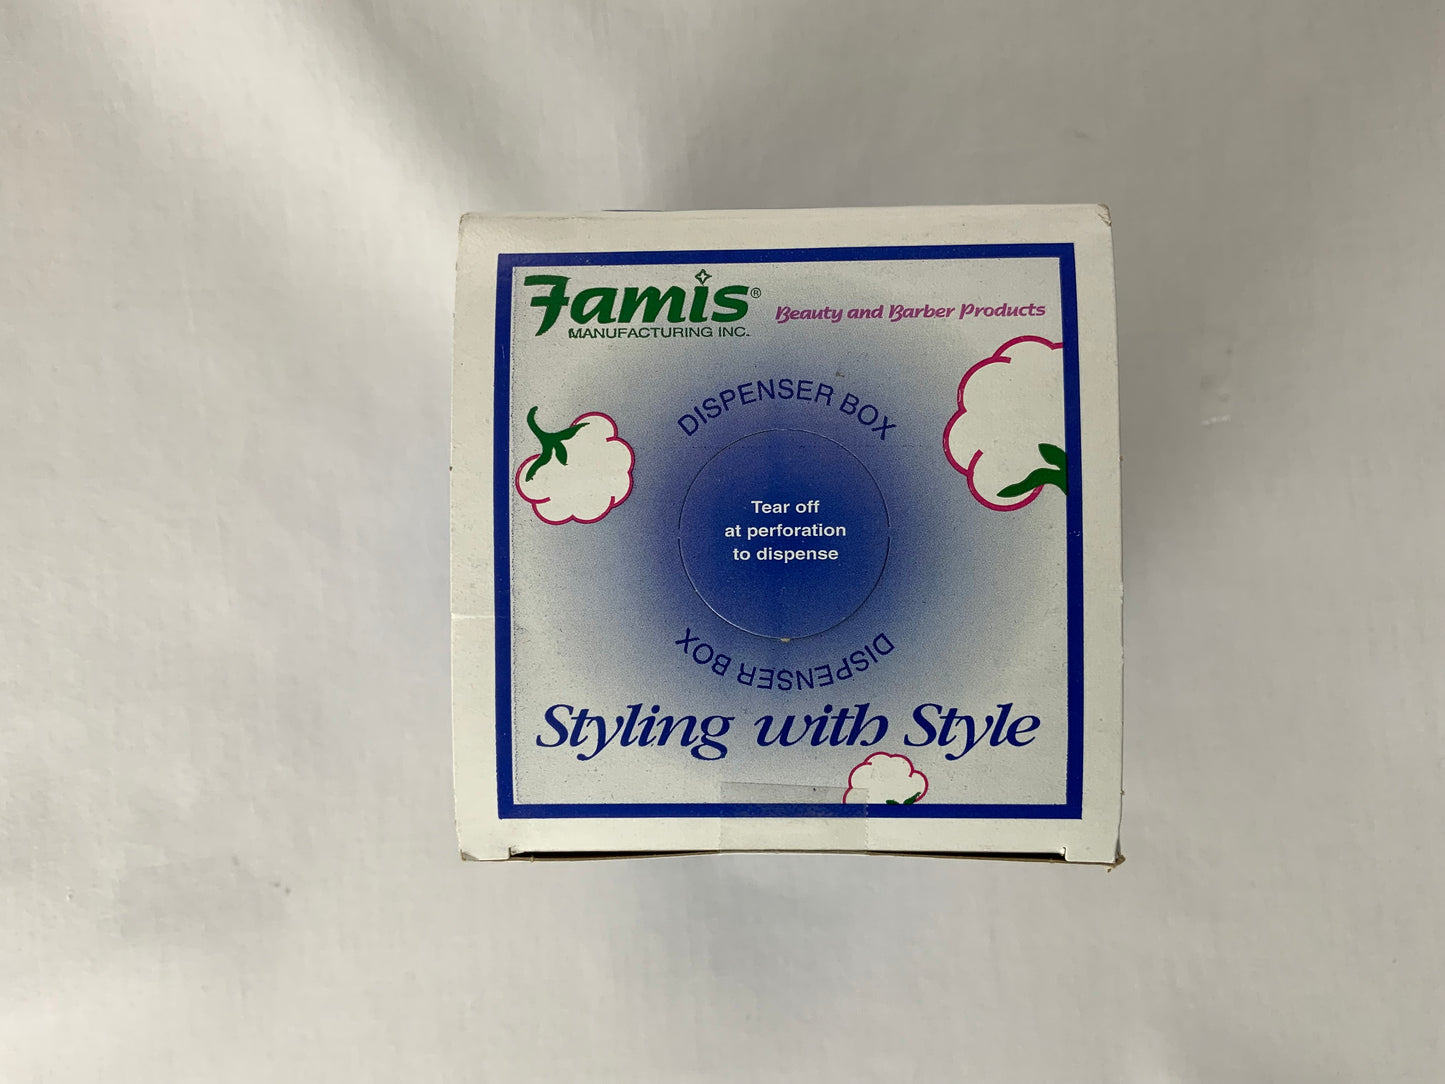 FAMIS Beauty Coil (#36231)